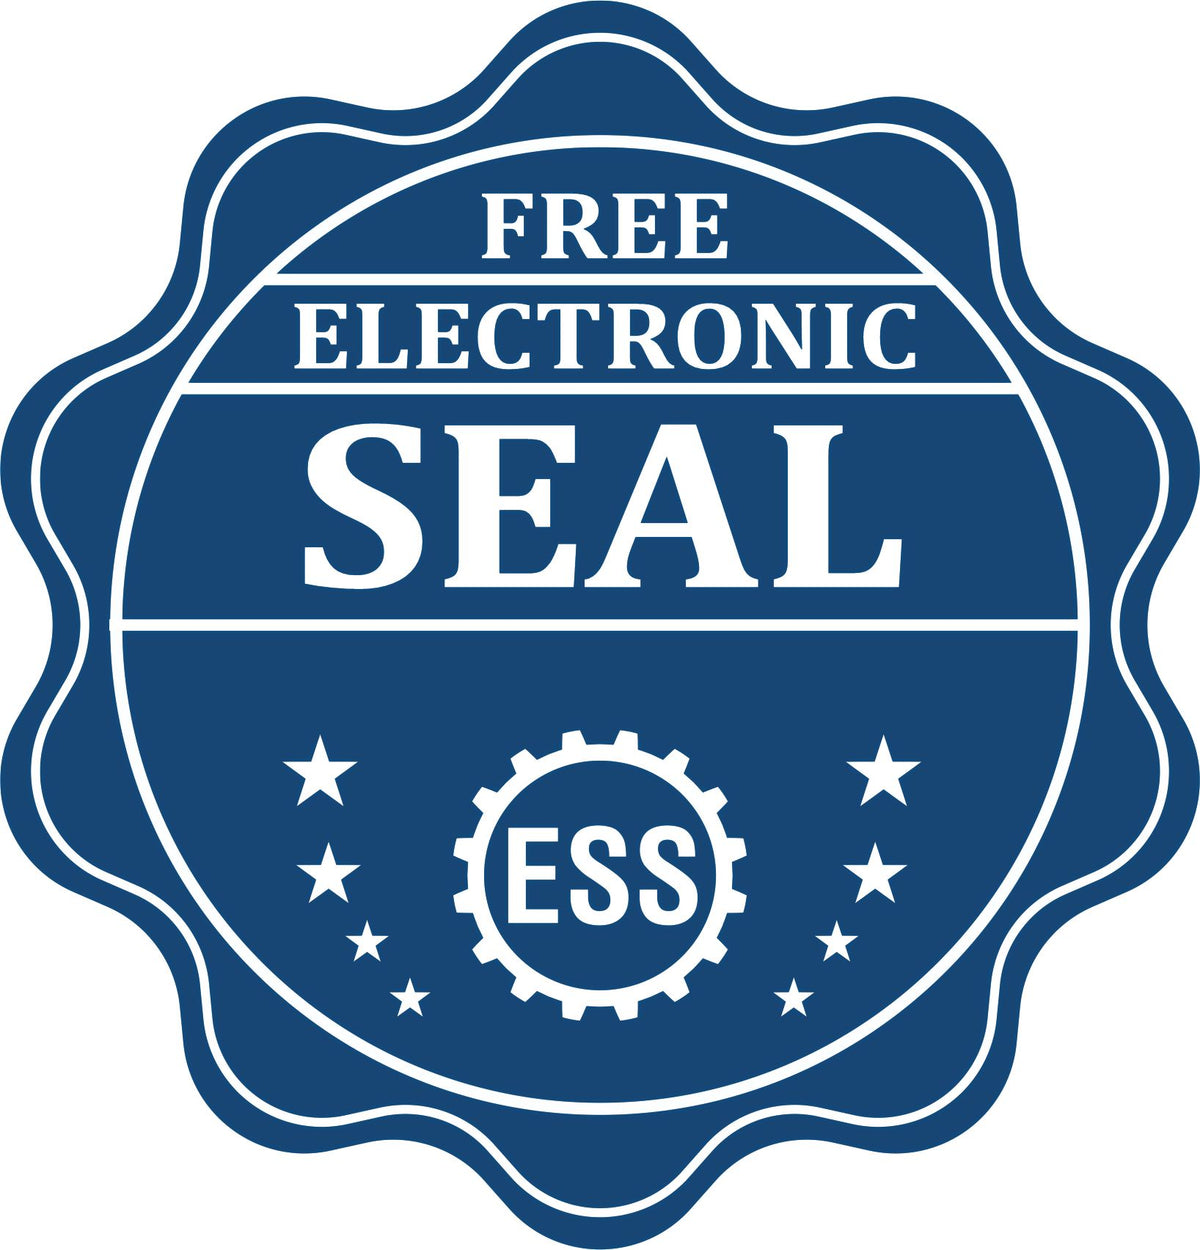 A badge showing a free electronic seal for the Heavy Duty Cast Iron Kentucky Land Surveyor Seal Embosser with stars and the ESS gear on the emblem.